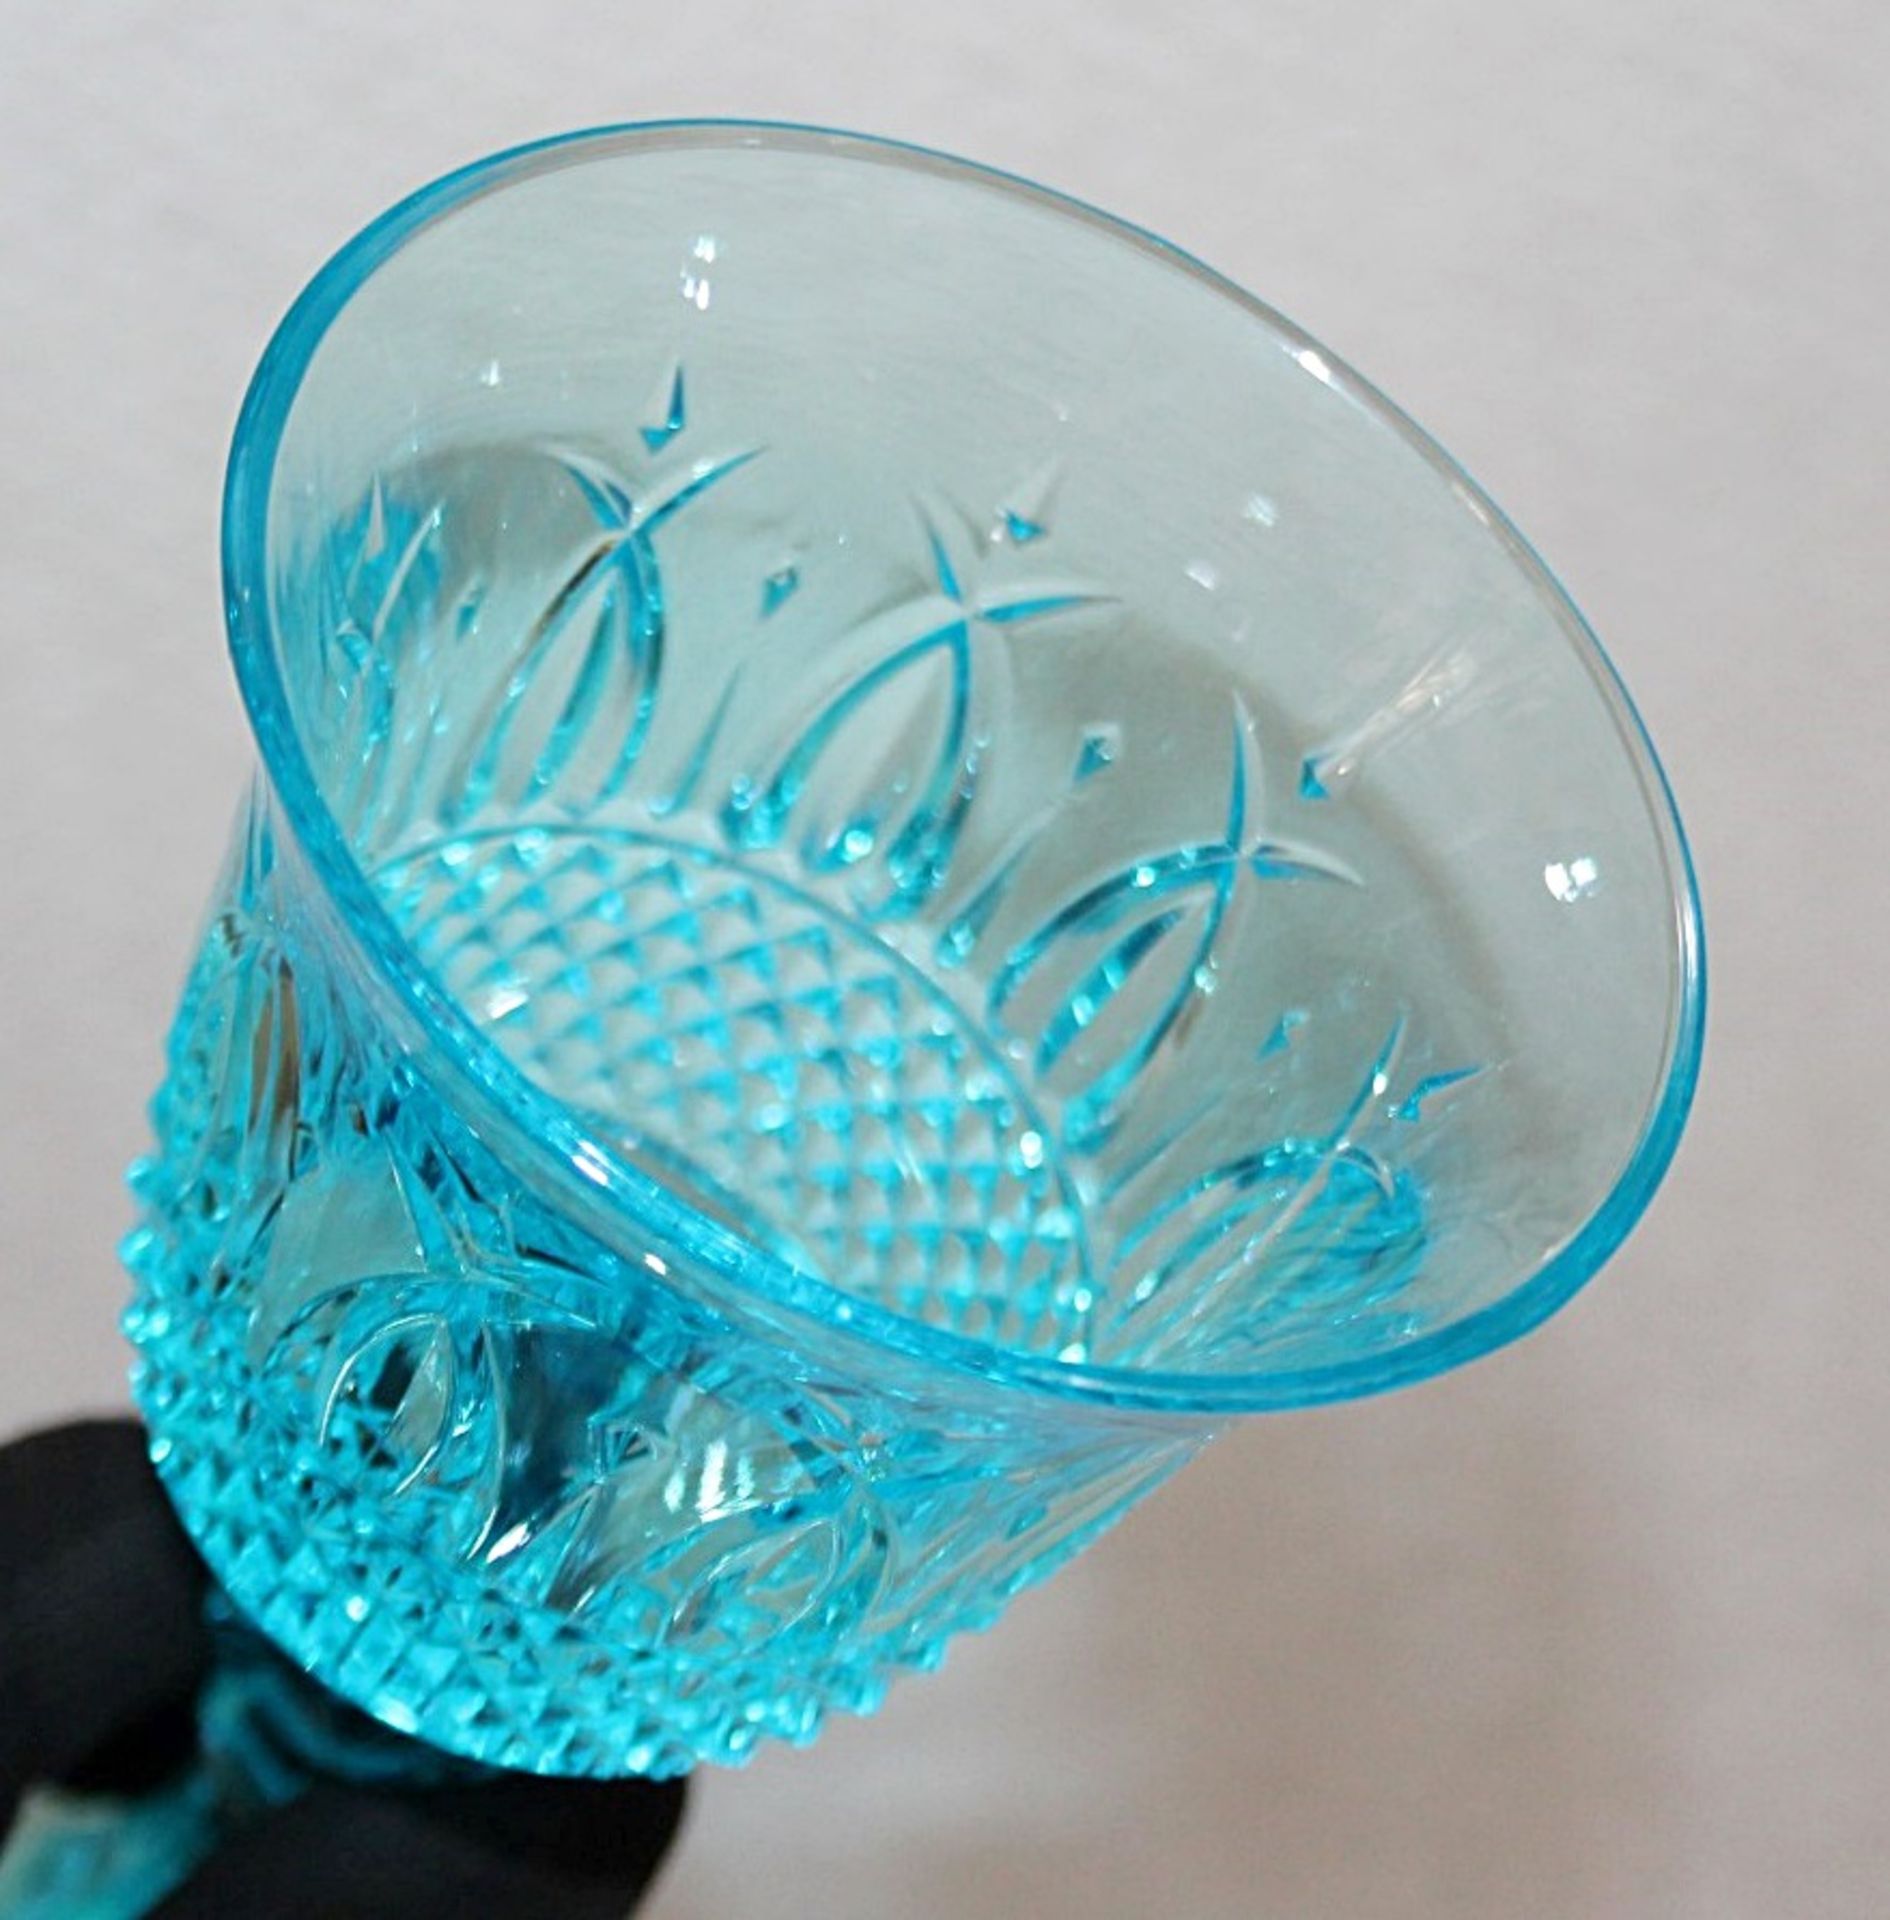 1 x Set of 6 x MARIO LUCA GIUSTI 'Italia' Synthetic Crystal Wine Goblets In Turquoise (180ml) - Image 7 of 9